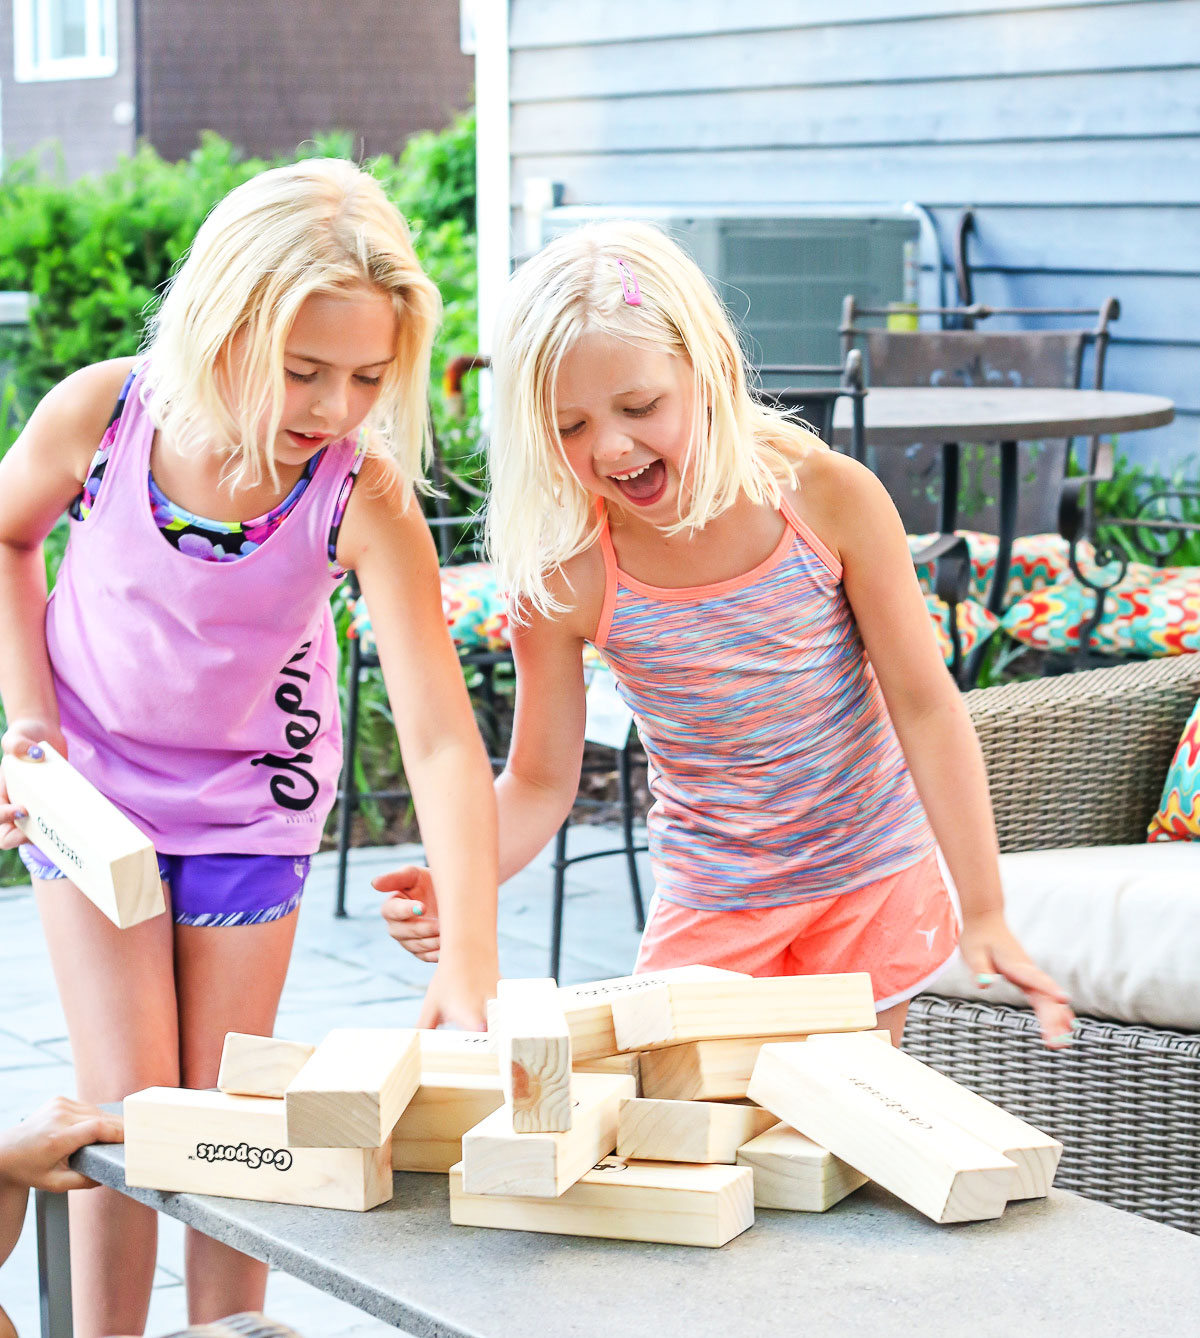 It's officially summer and fun outdoor games are on rotation to keep the kids busy and off devices. Am I the only mom struggling??